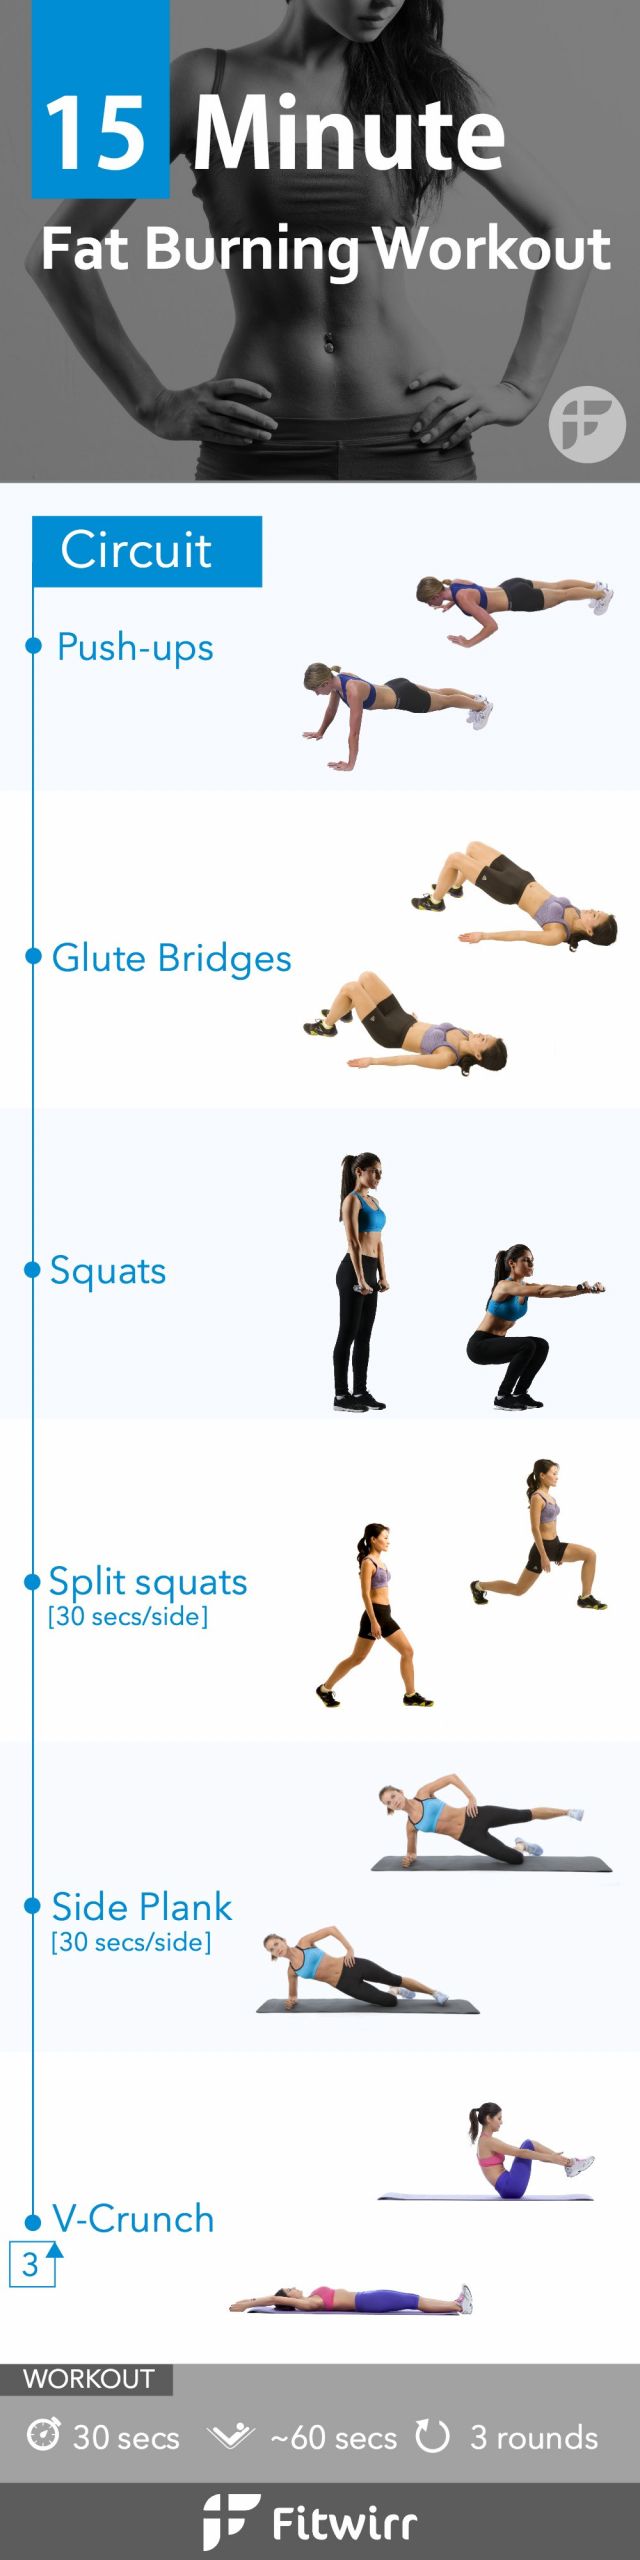 Easy Fat Burning Workouts
 15 Minute Bodyweight Fat Loss Workout for Women